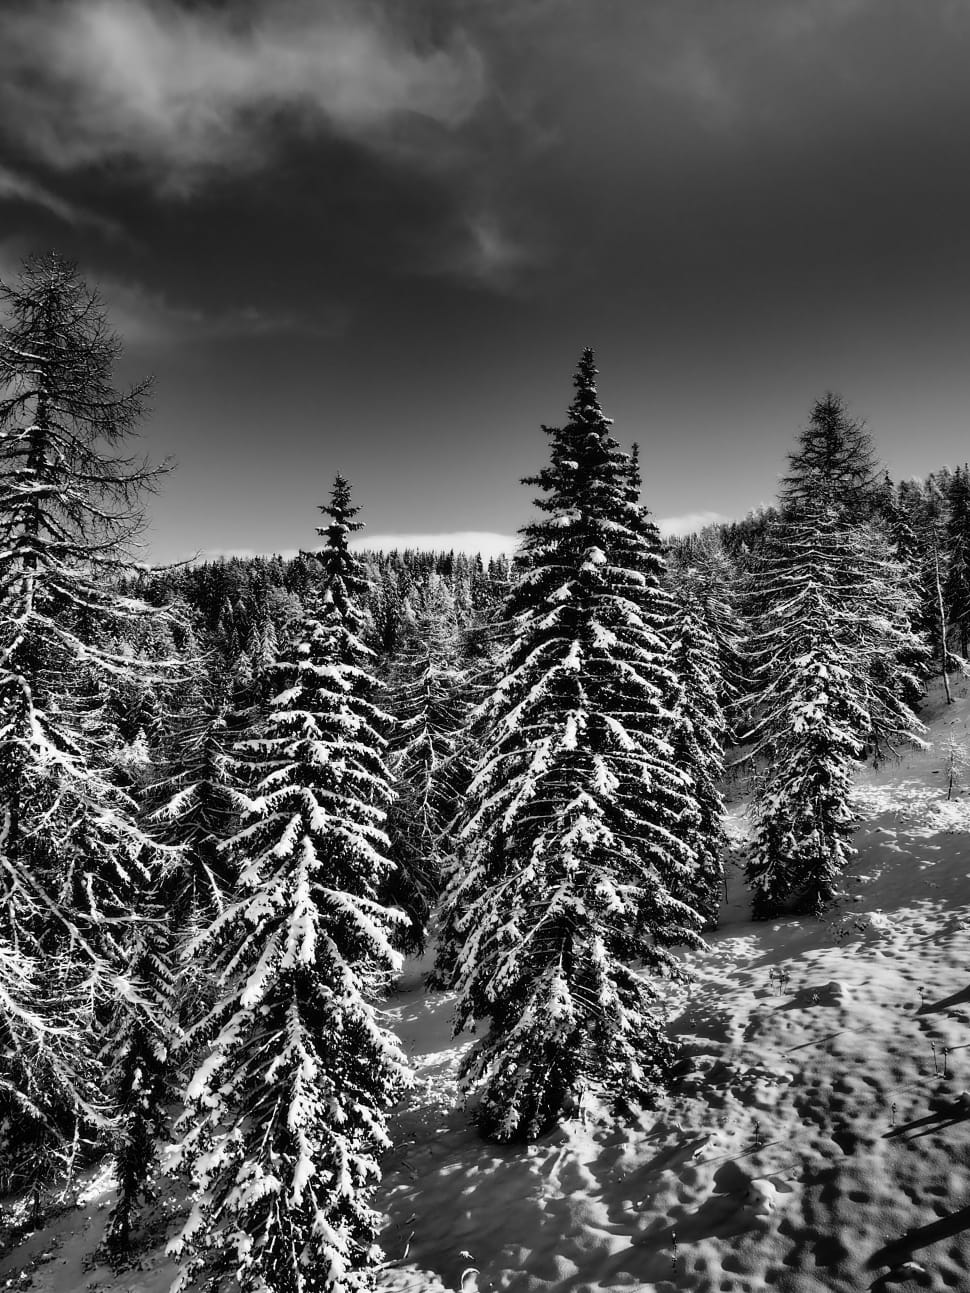 grayscale landscape scenery photo of snow covered pine trees preview